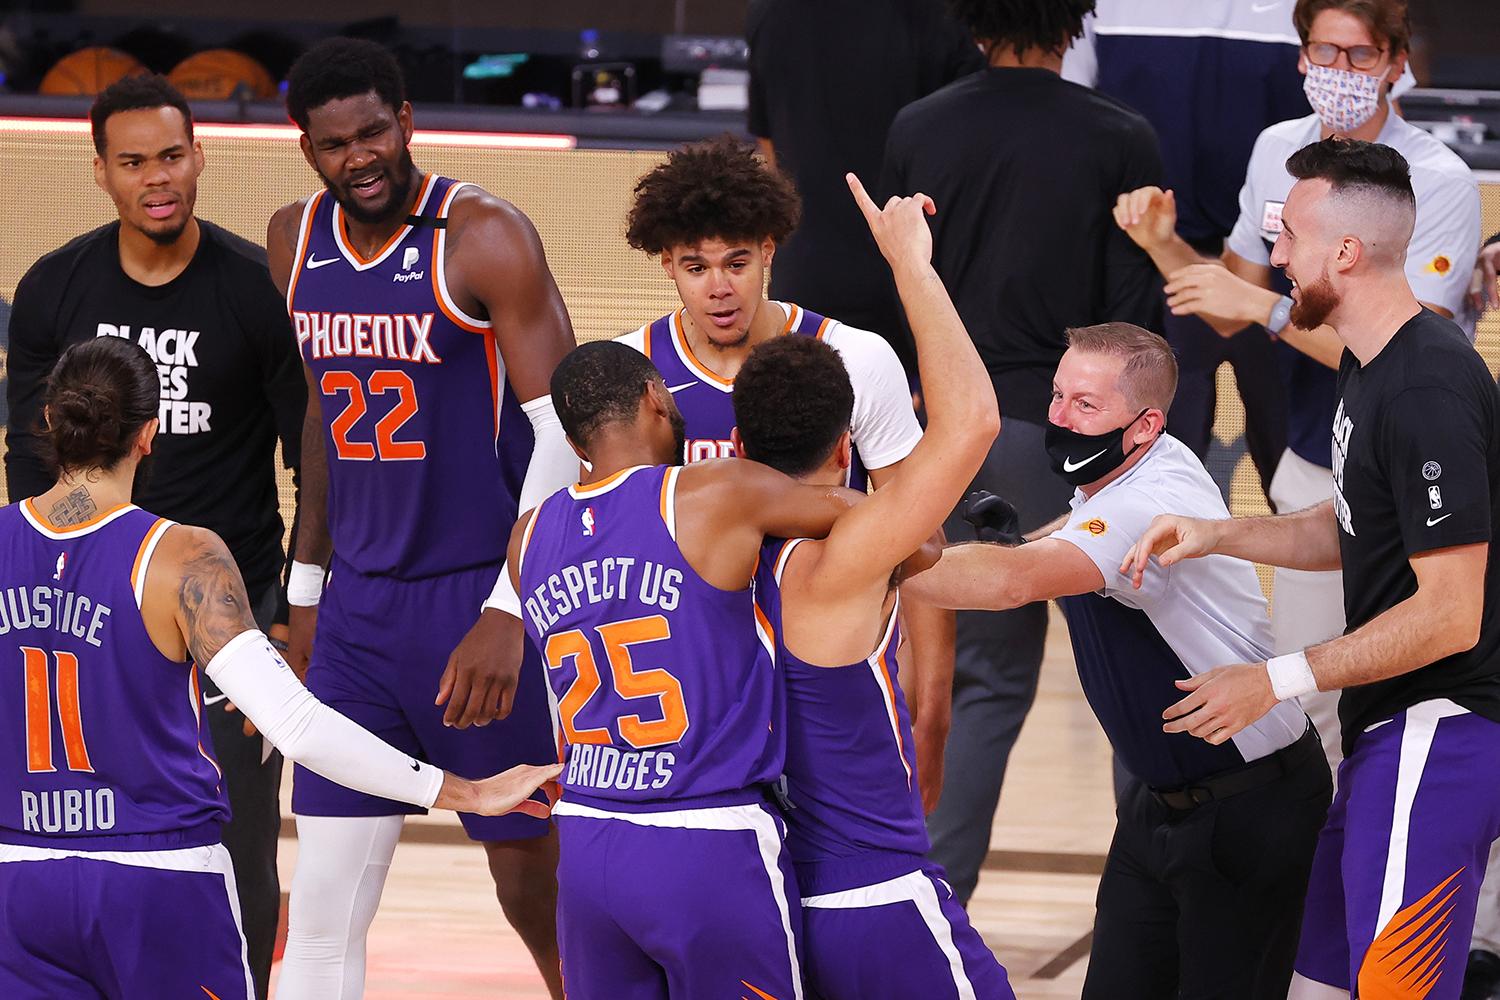 Breaking the Drought: The Phoenix Suns' Quest for Their First NBA Championship